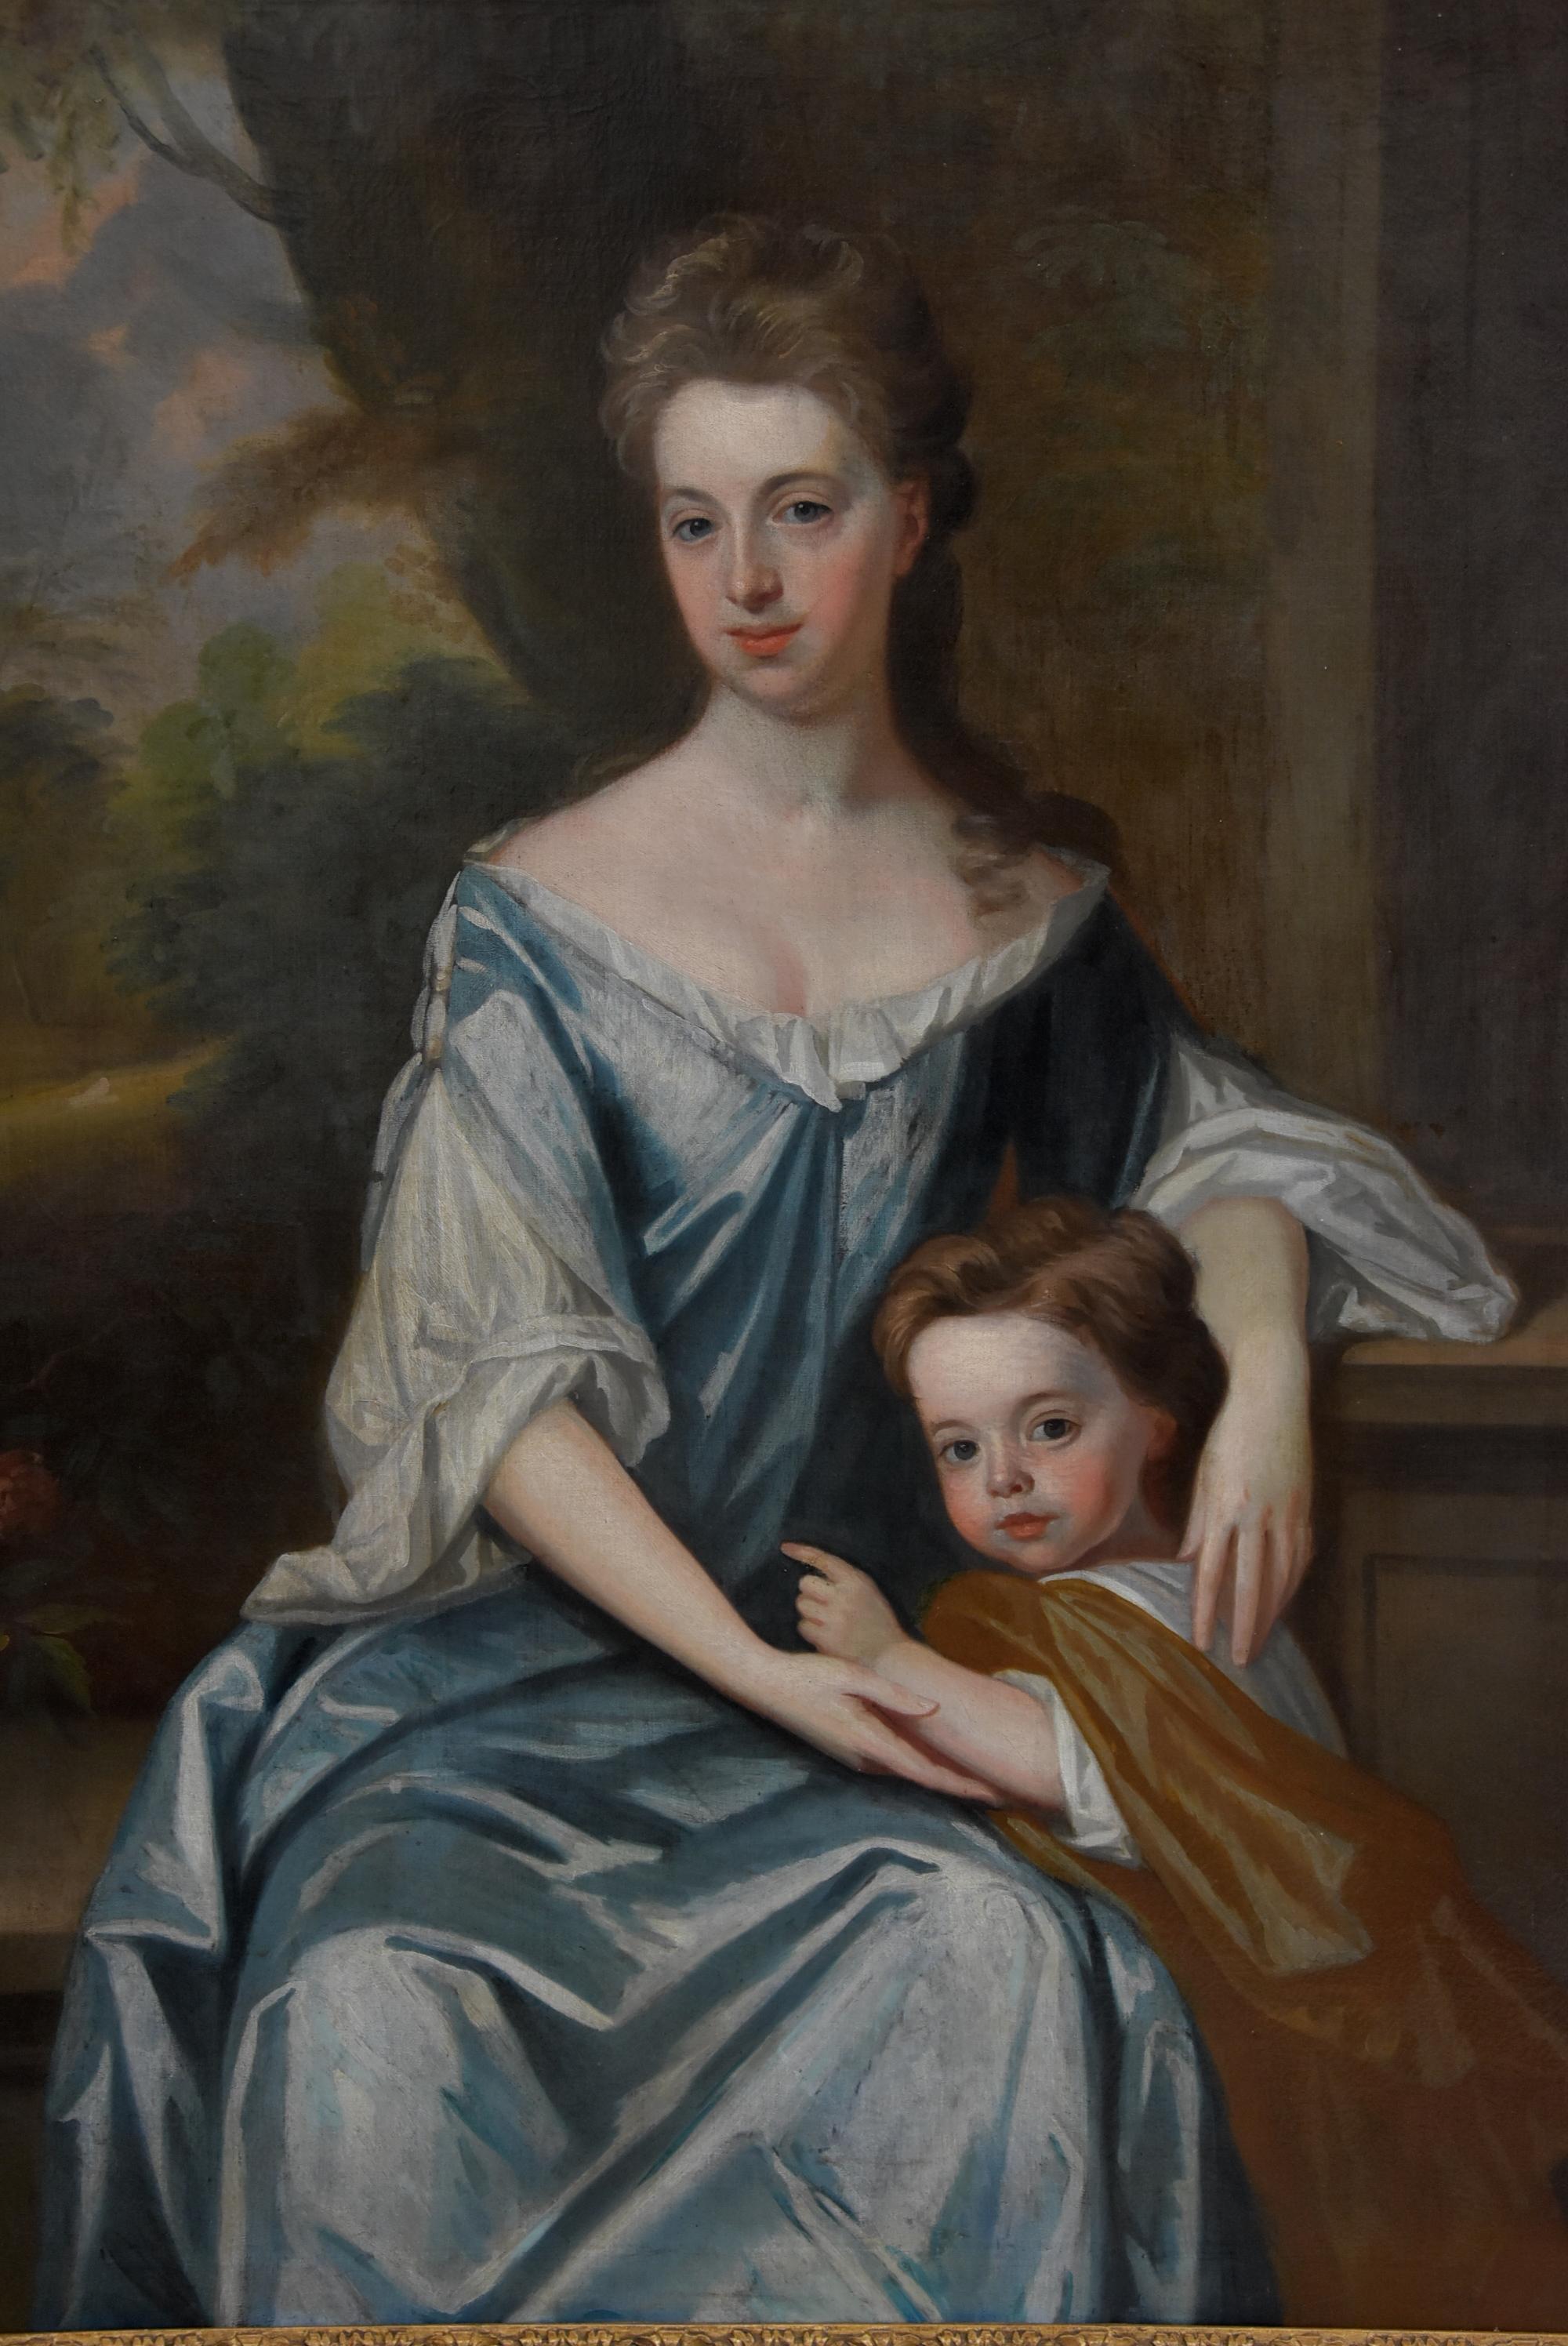 A large early 18th century portrait (1700-1720) oil on canvas 'Lady & Child' attributed to Michael Dahl (1659-1743).

This finely painted portrait depicts a seated young lady in blue silk dress with a child by her side with a landscape in the